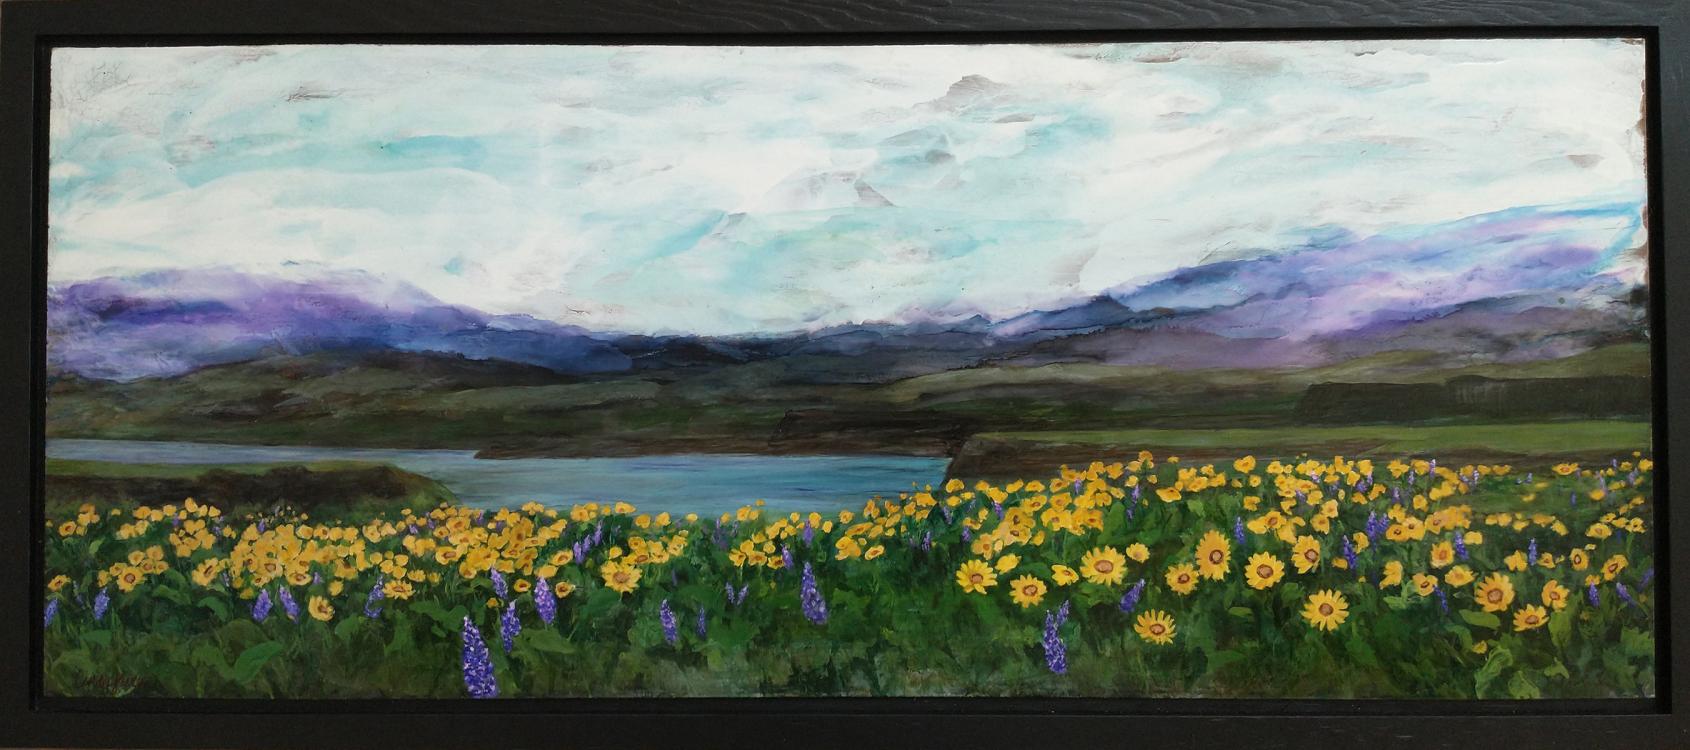 Painting of wildflowers, a lake, mountains, and a cloudy sky. 